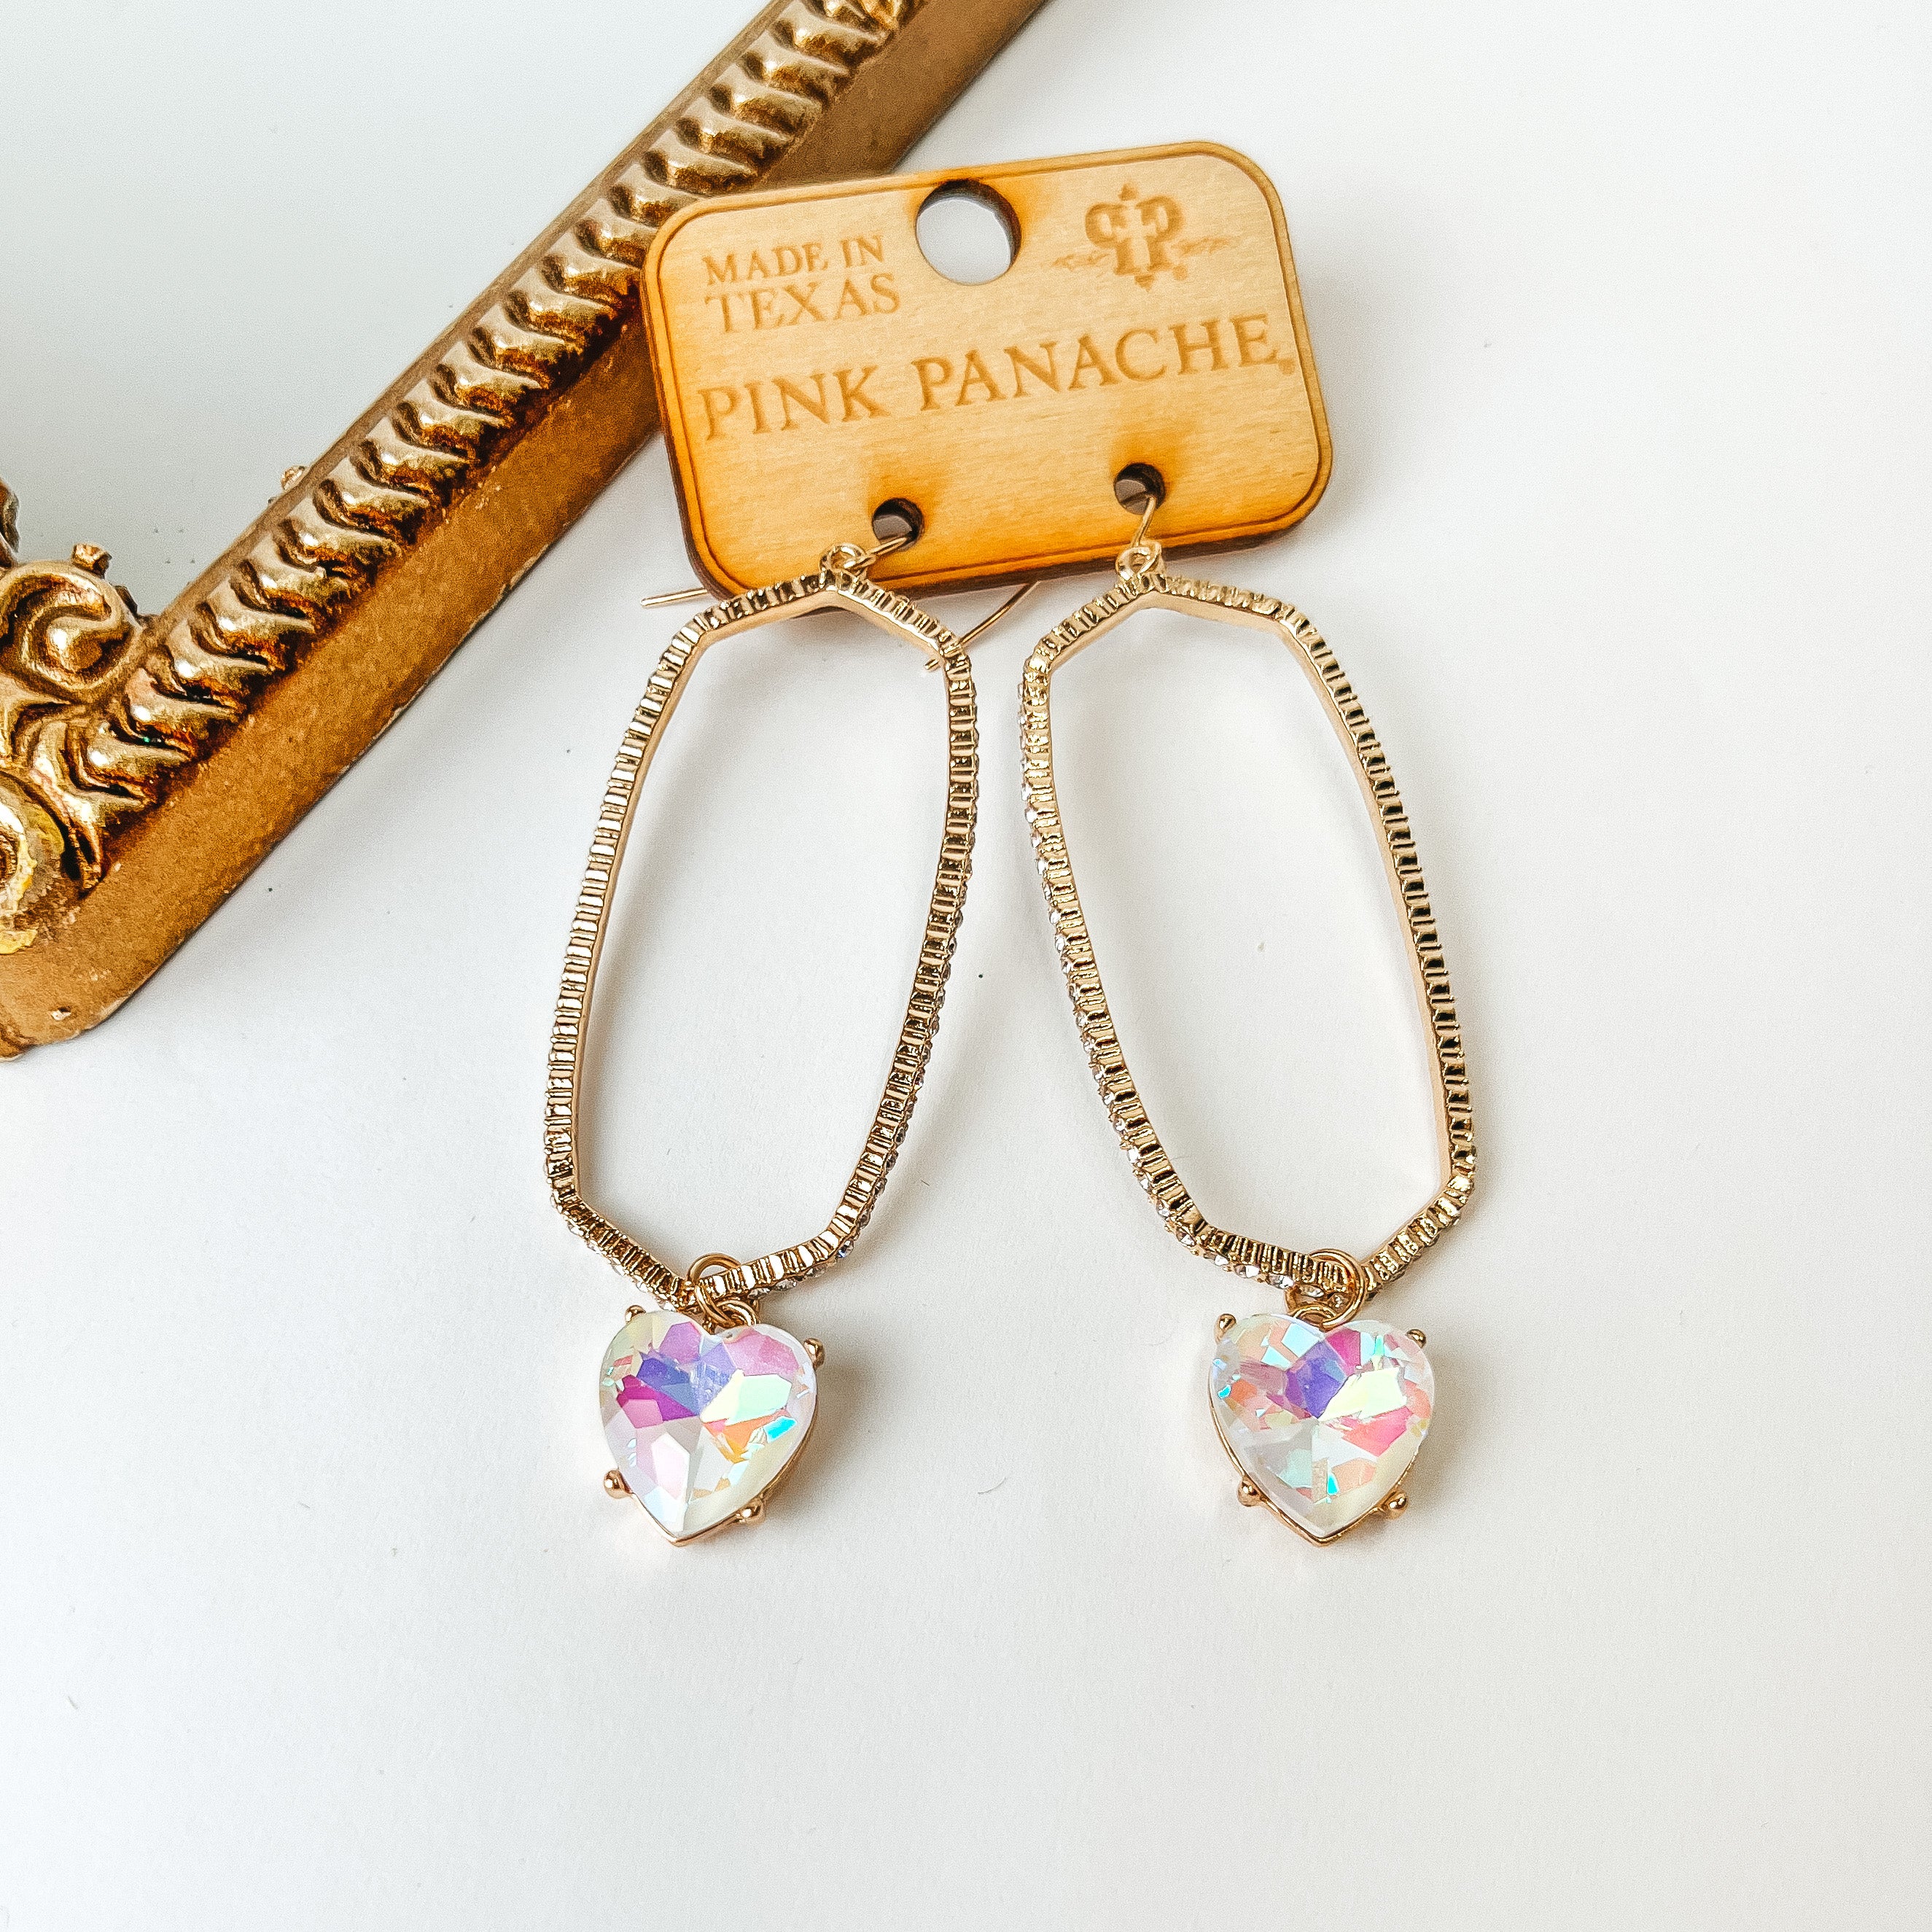 Pink Panache | Crystal Oval Outline Earrings with White Opal Crystal Heart Teardrops in Gold Tone - Giddy Up Glamour Boutique